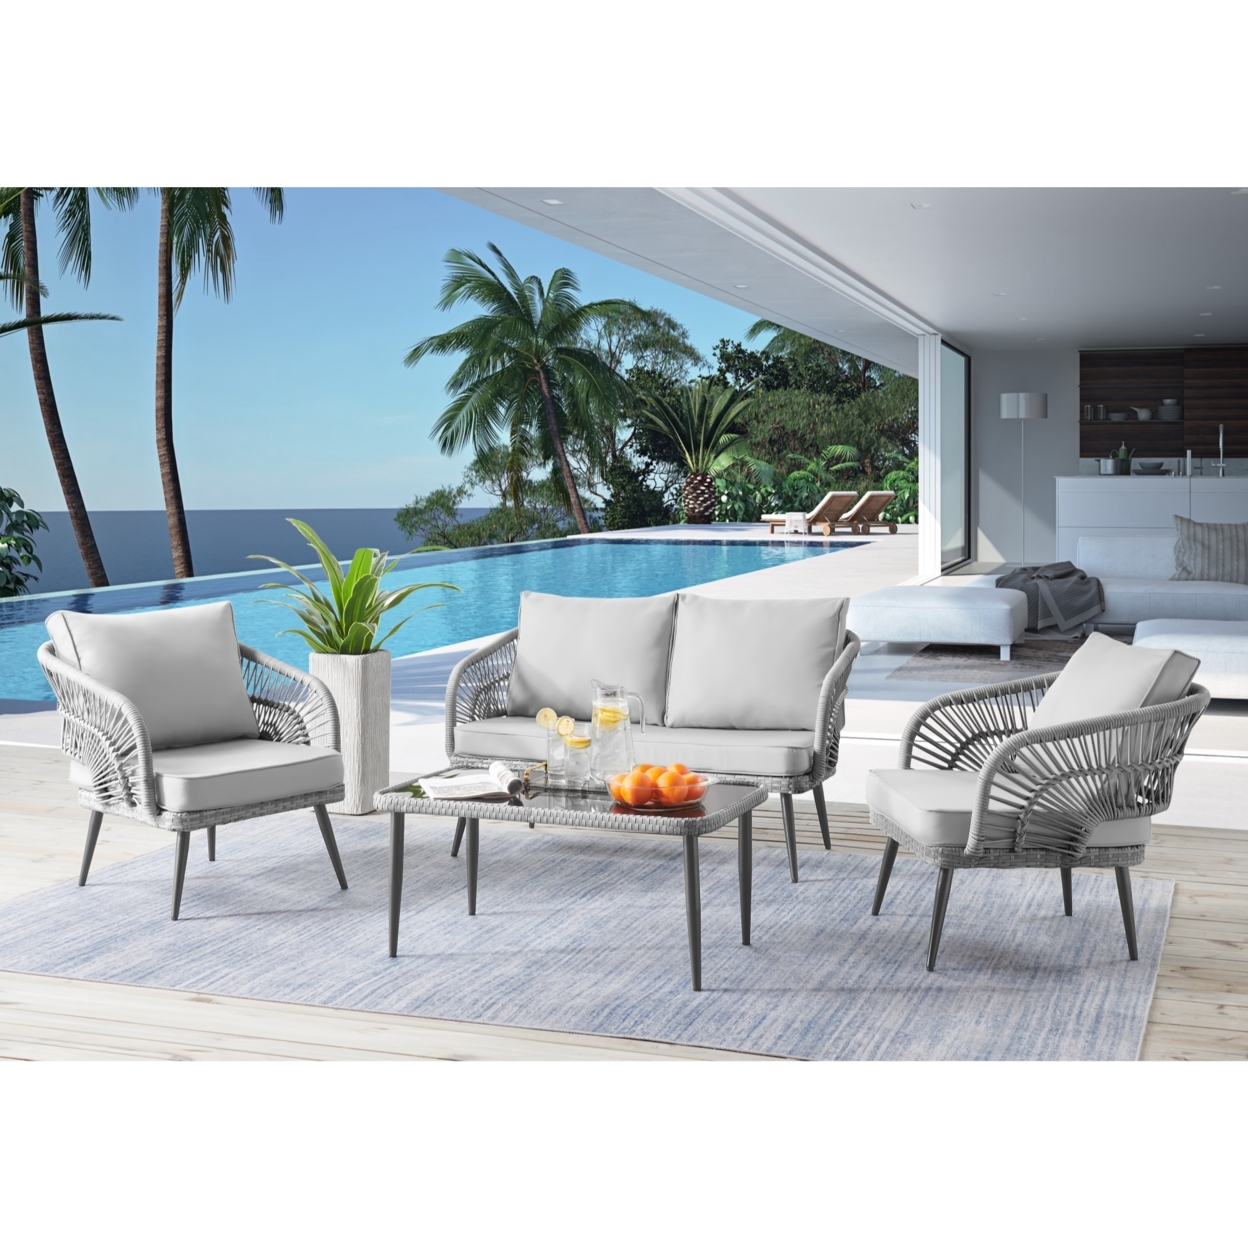 Javien Outdoor Set -All-Weather Faux Rattan Wicker Design, Removable And Washable Cushions - Light Grey/4 Seating